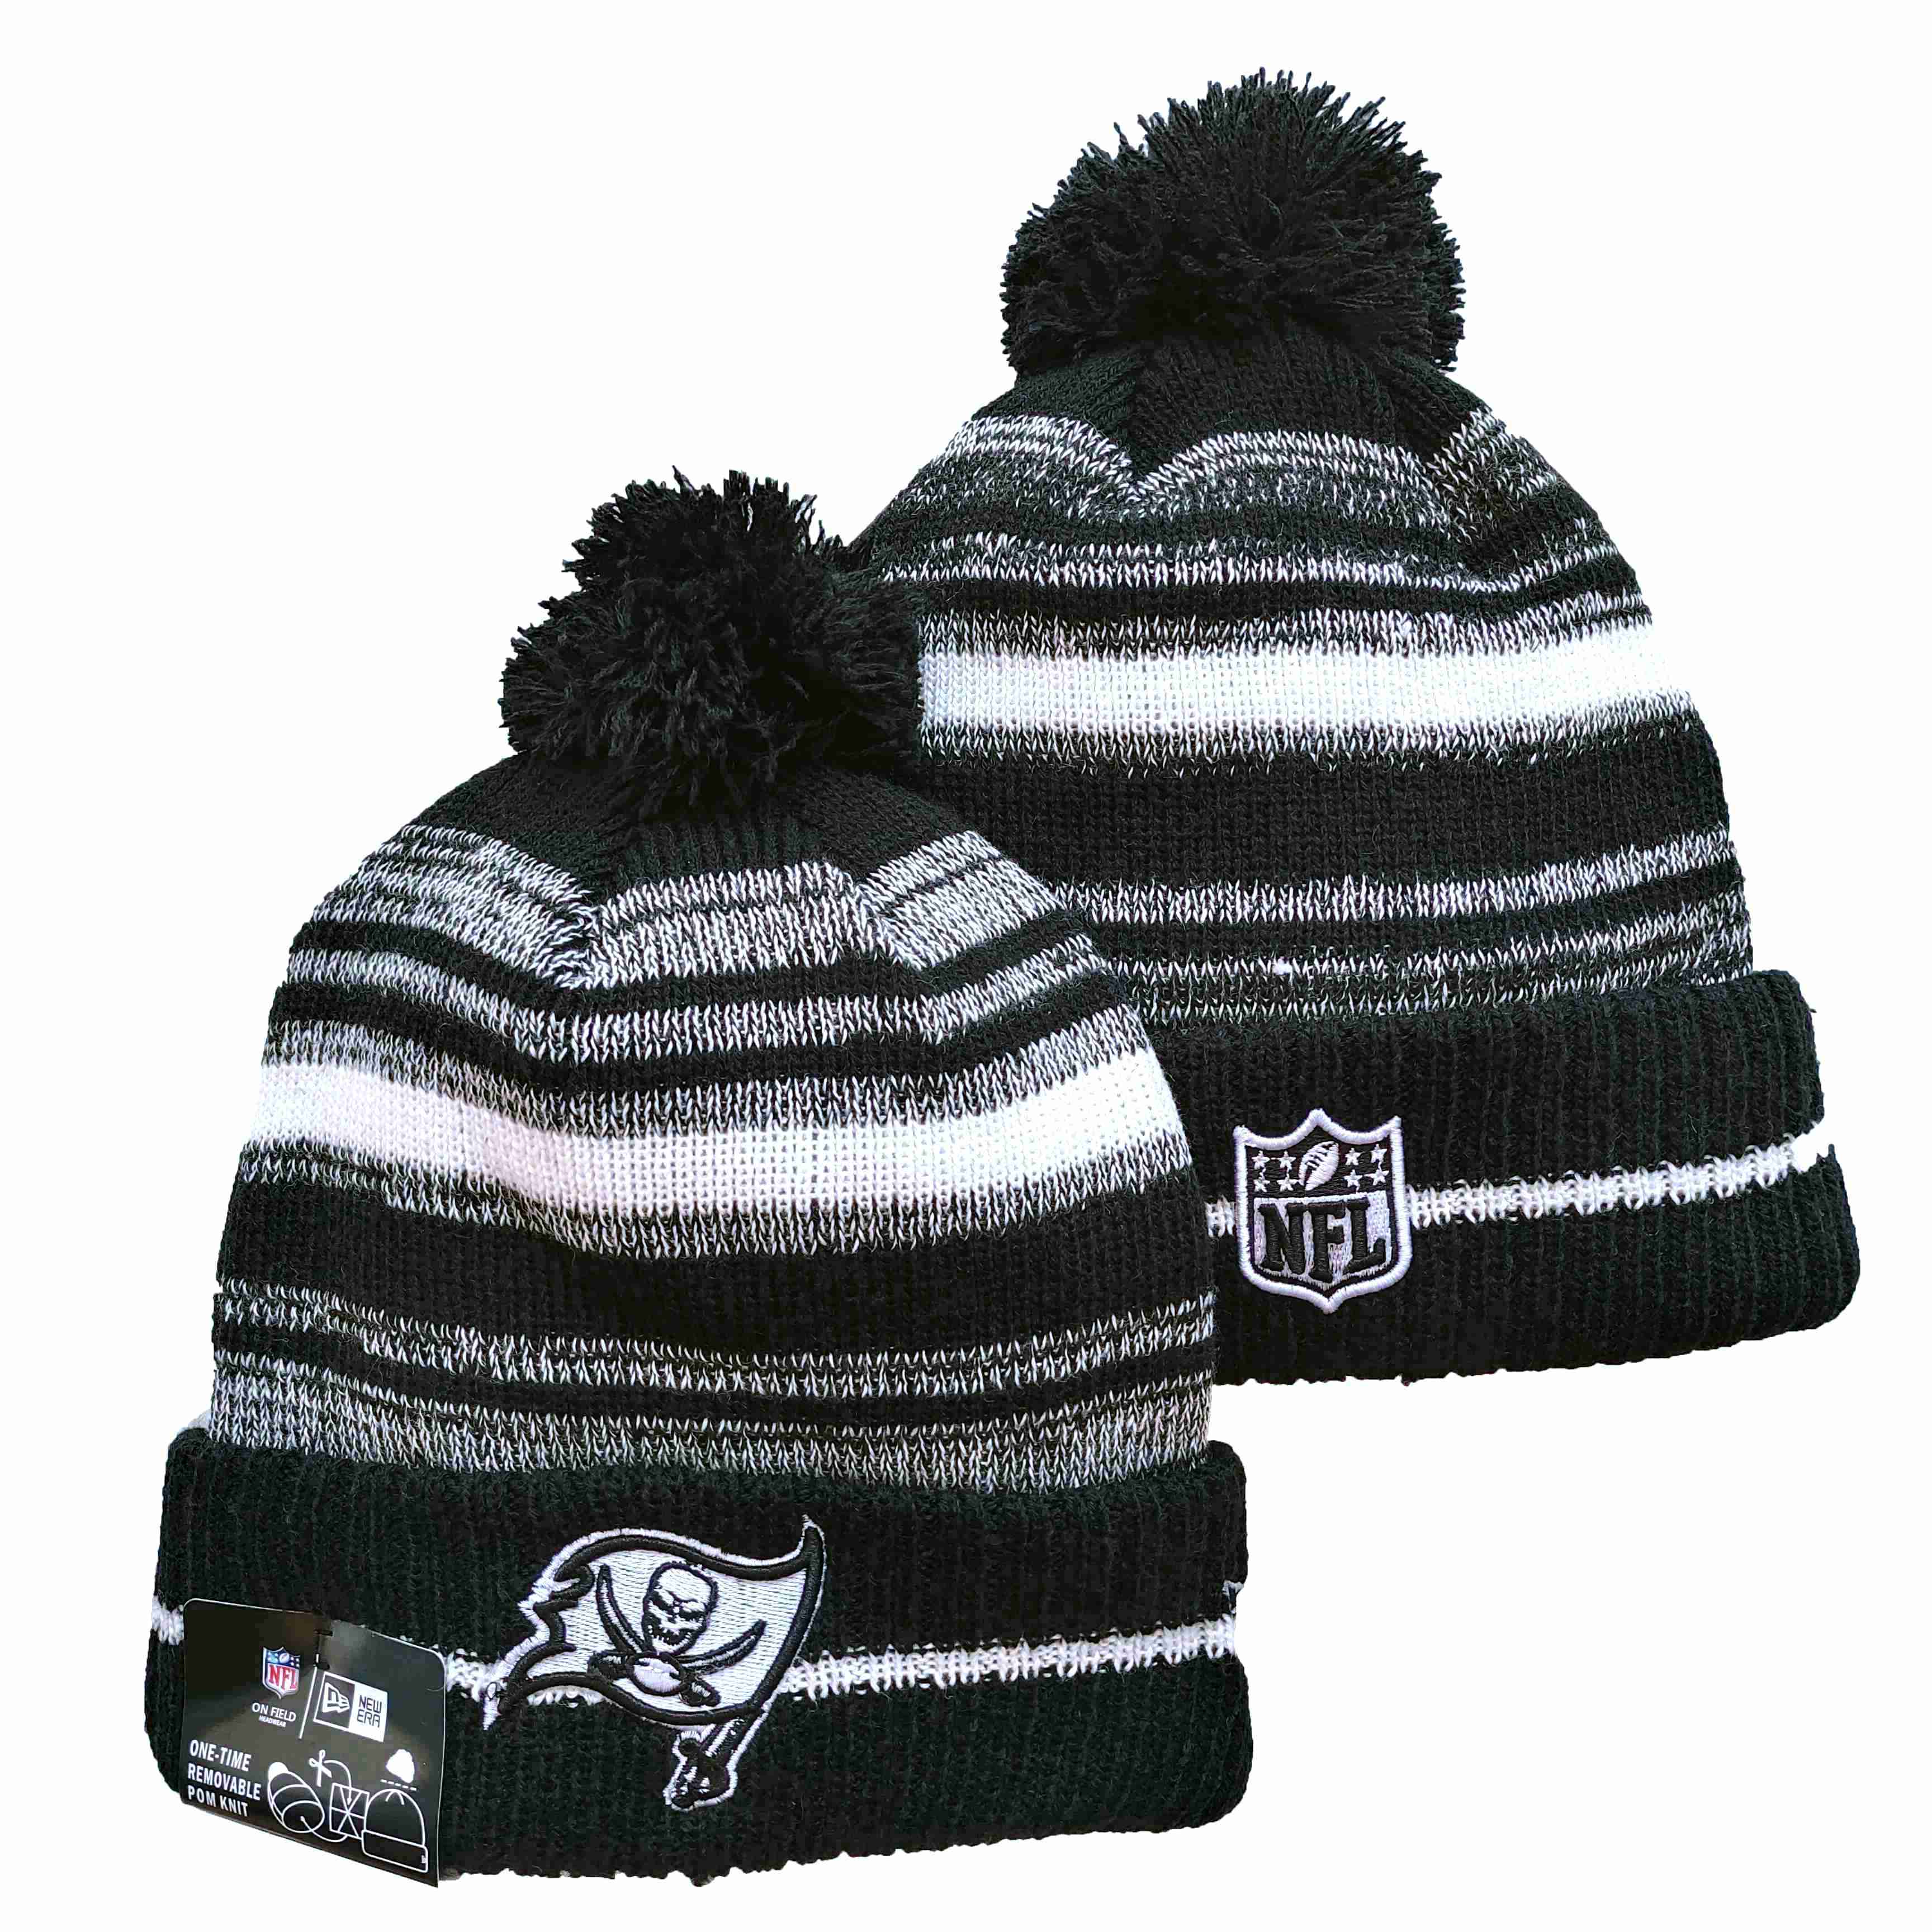 NFL Tampa Bay Buccaneers Beanies Knit Hats-YD1286